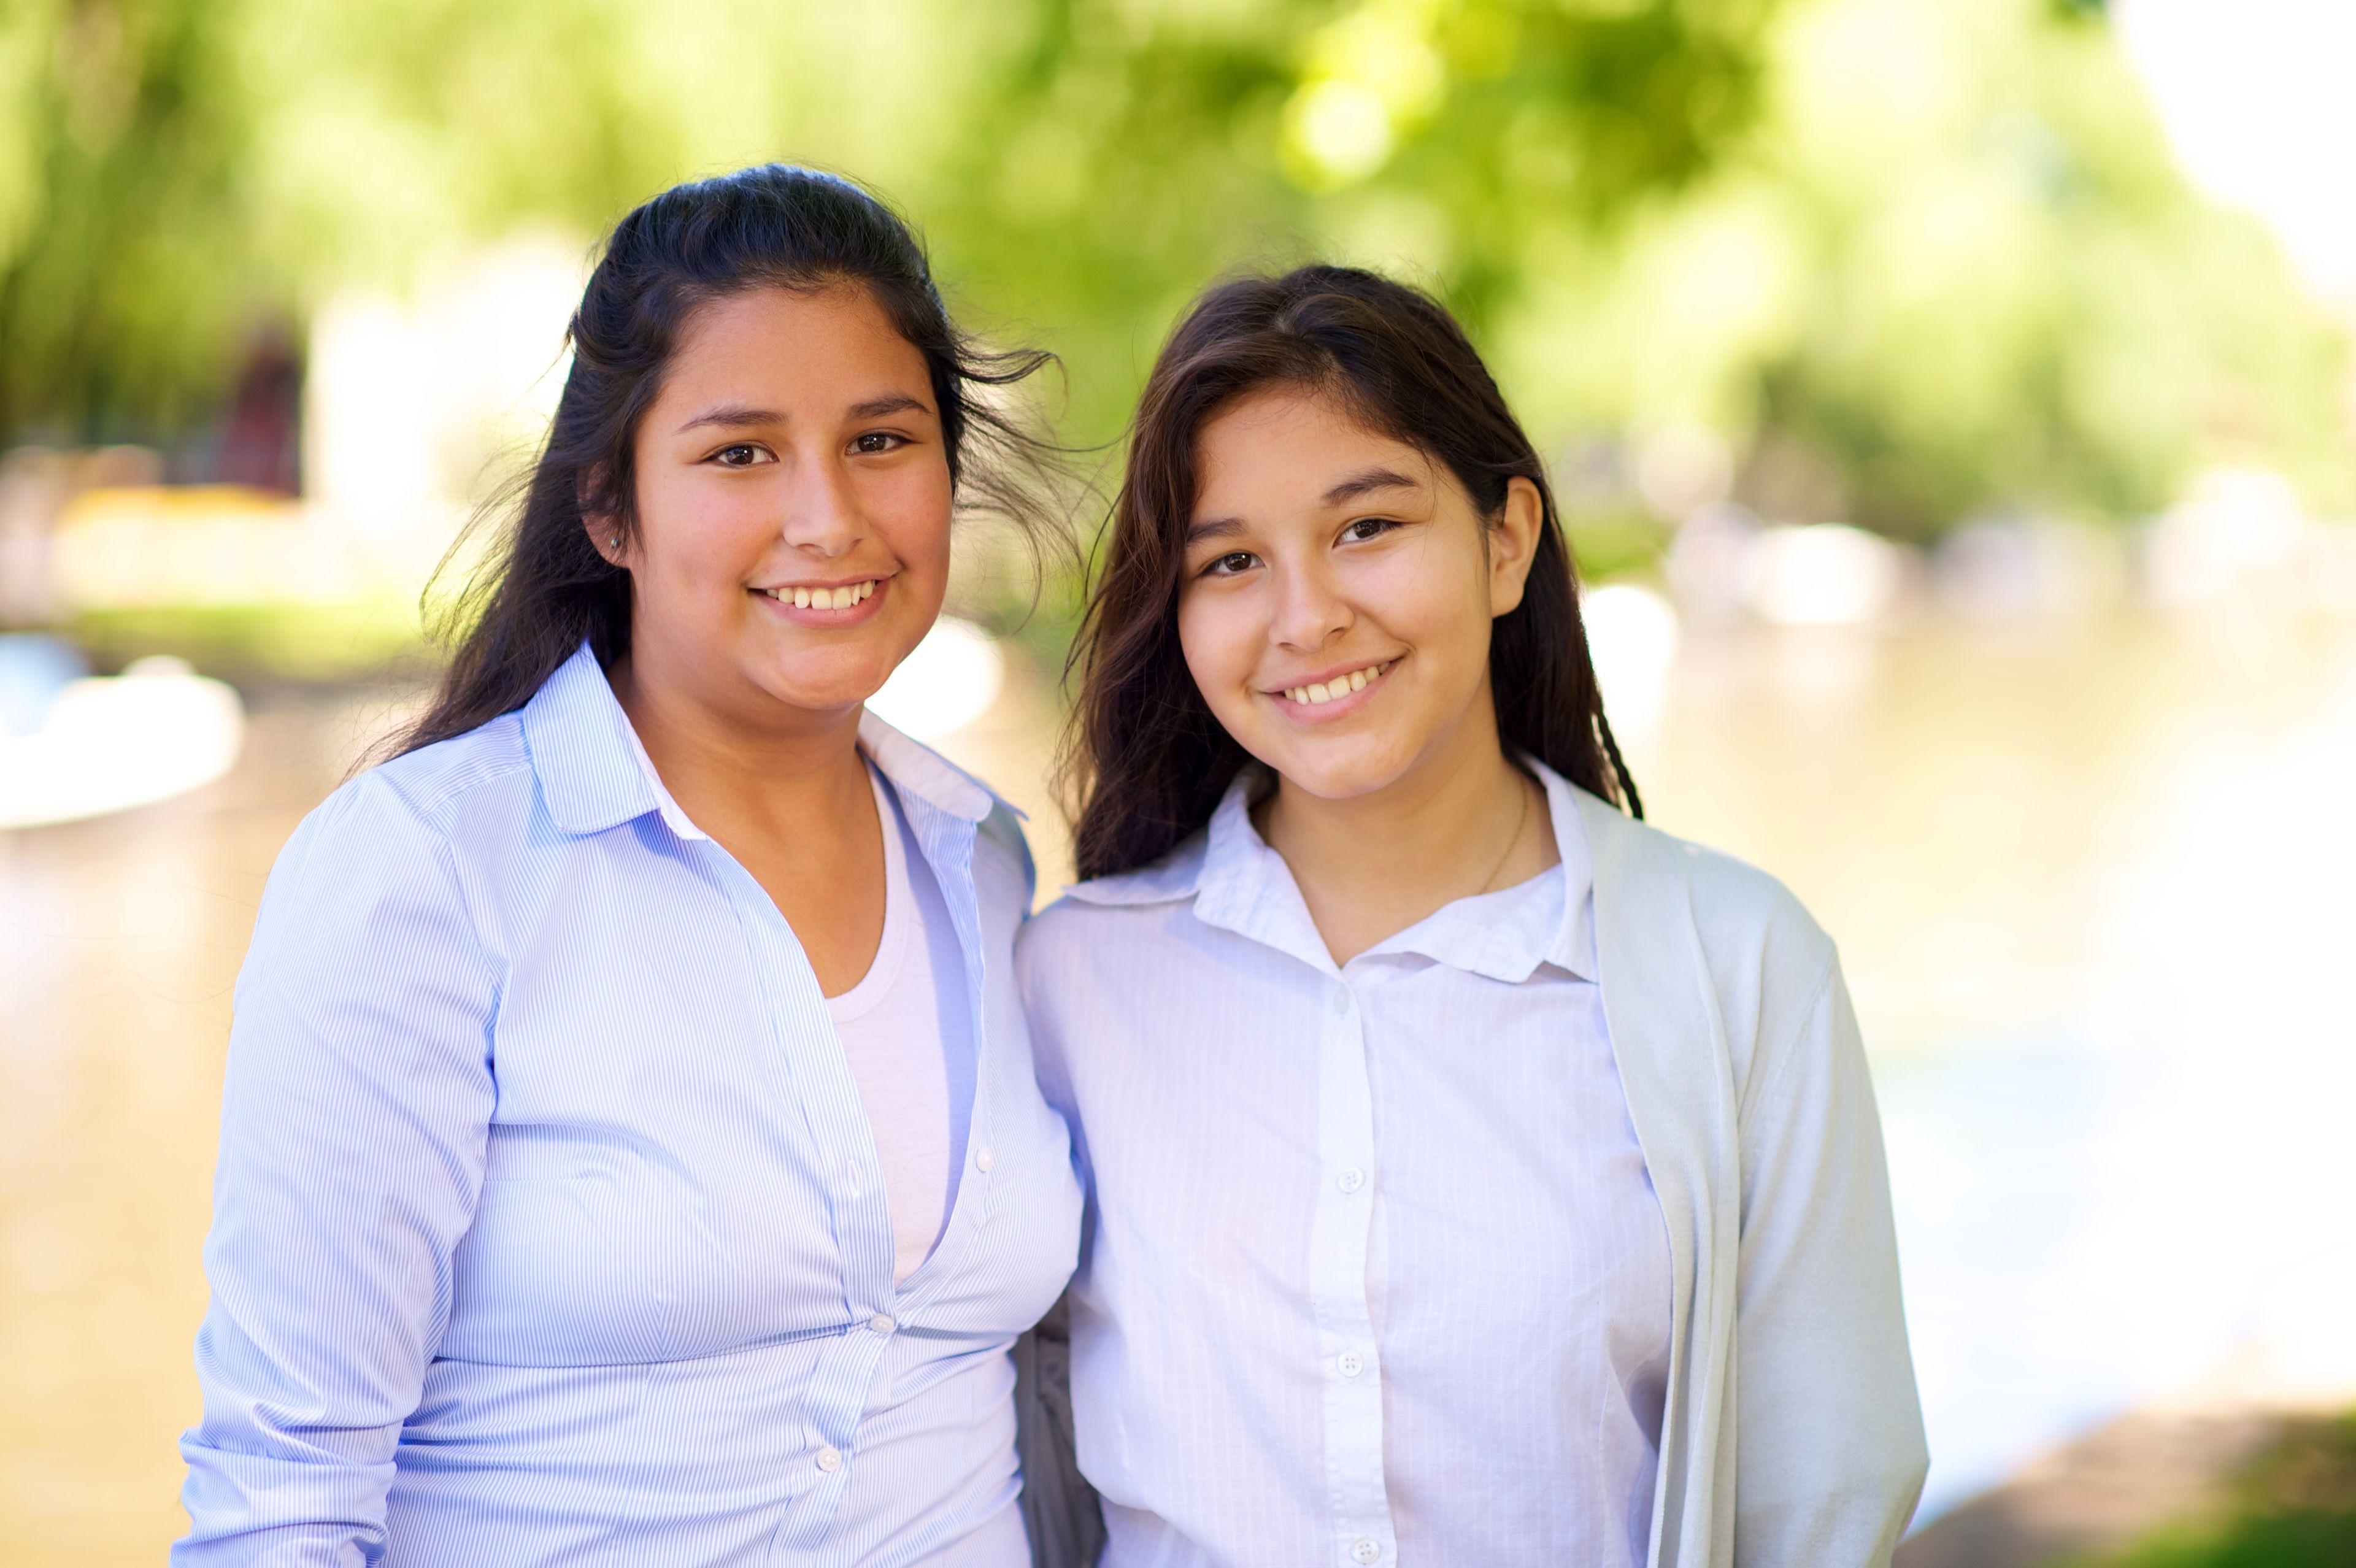 A portrait of two young sisters from Argentina, standing outside.